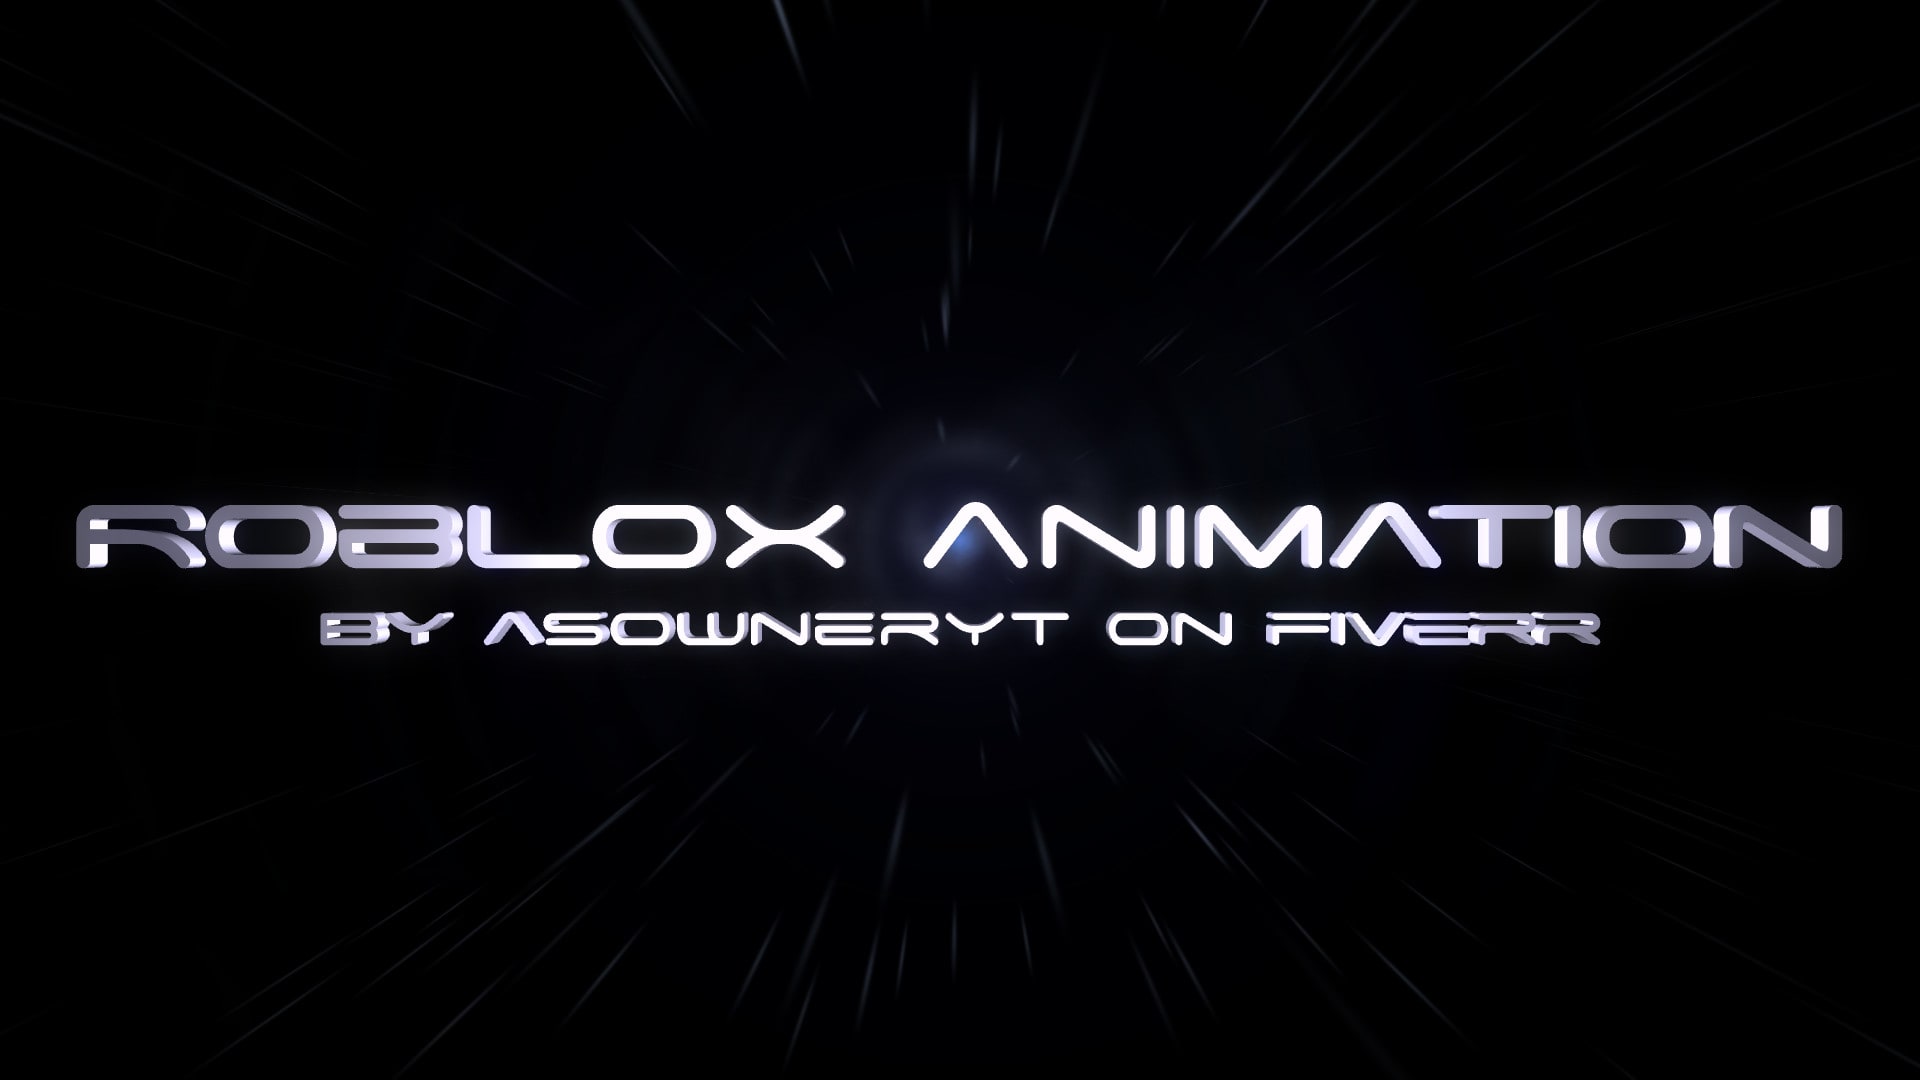 Make An Animated Roblox Game Trailer By Asowneryt Fiverr - darkness 2 trailer roblox